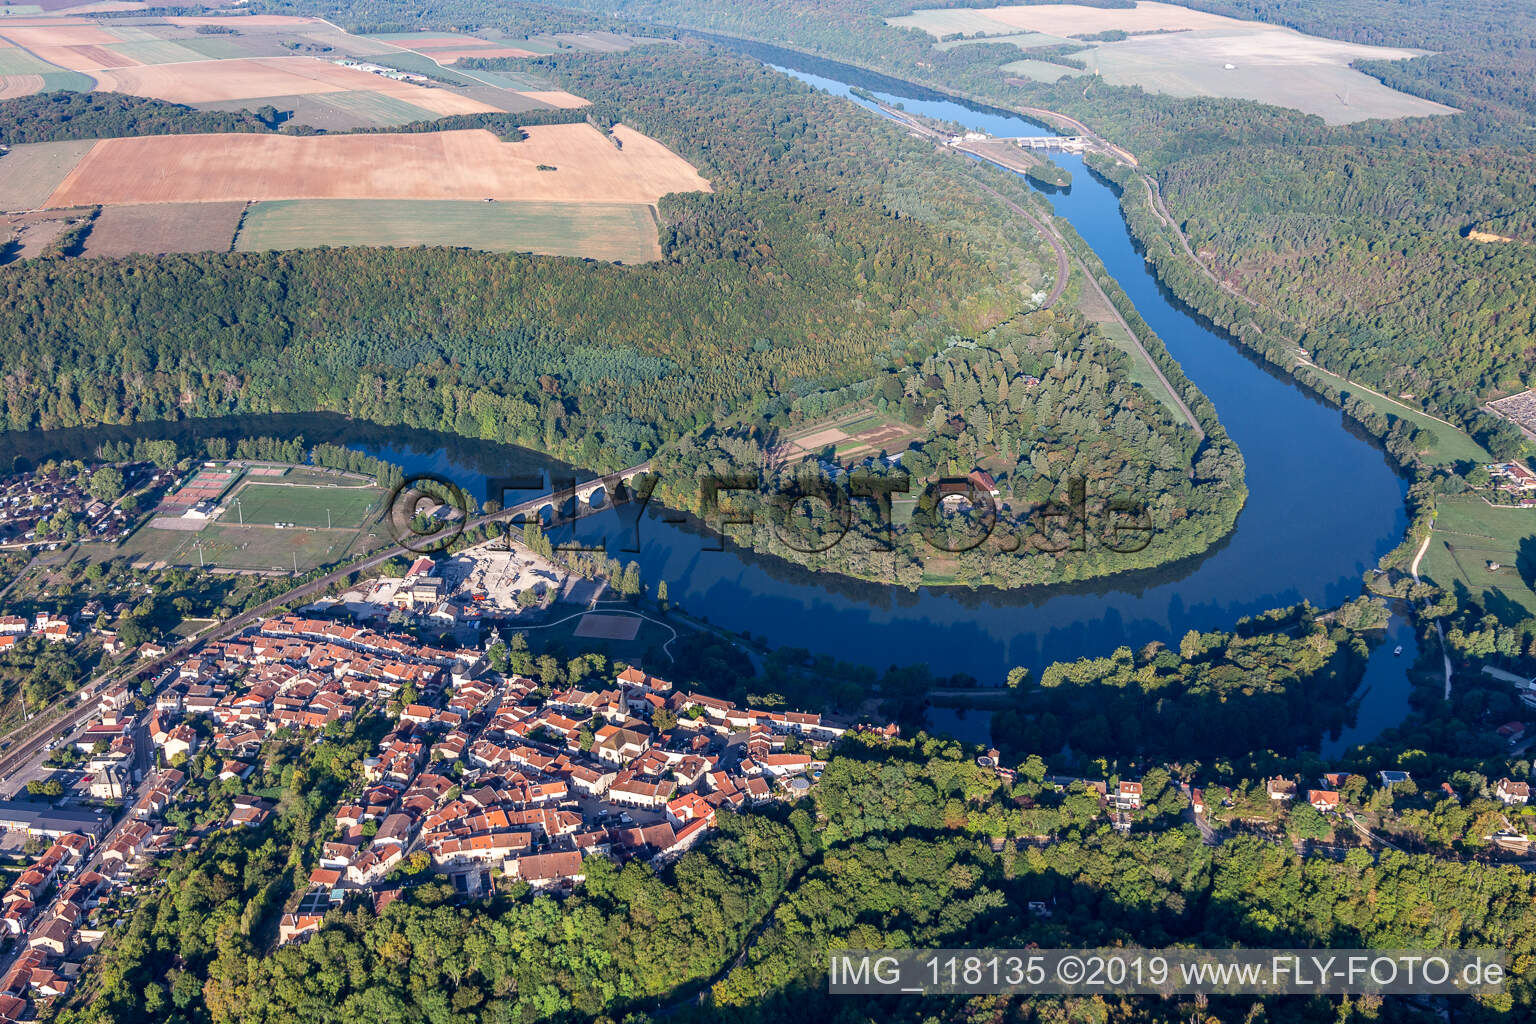 Curved loop of the riparian zones on the course of the river Moselle in Liverdun in Grand Est, France